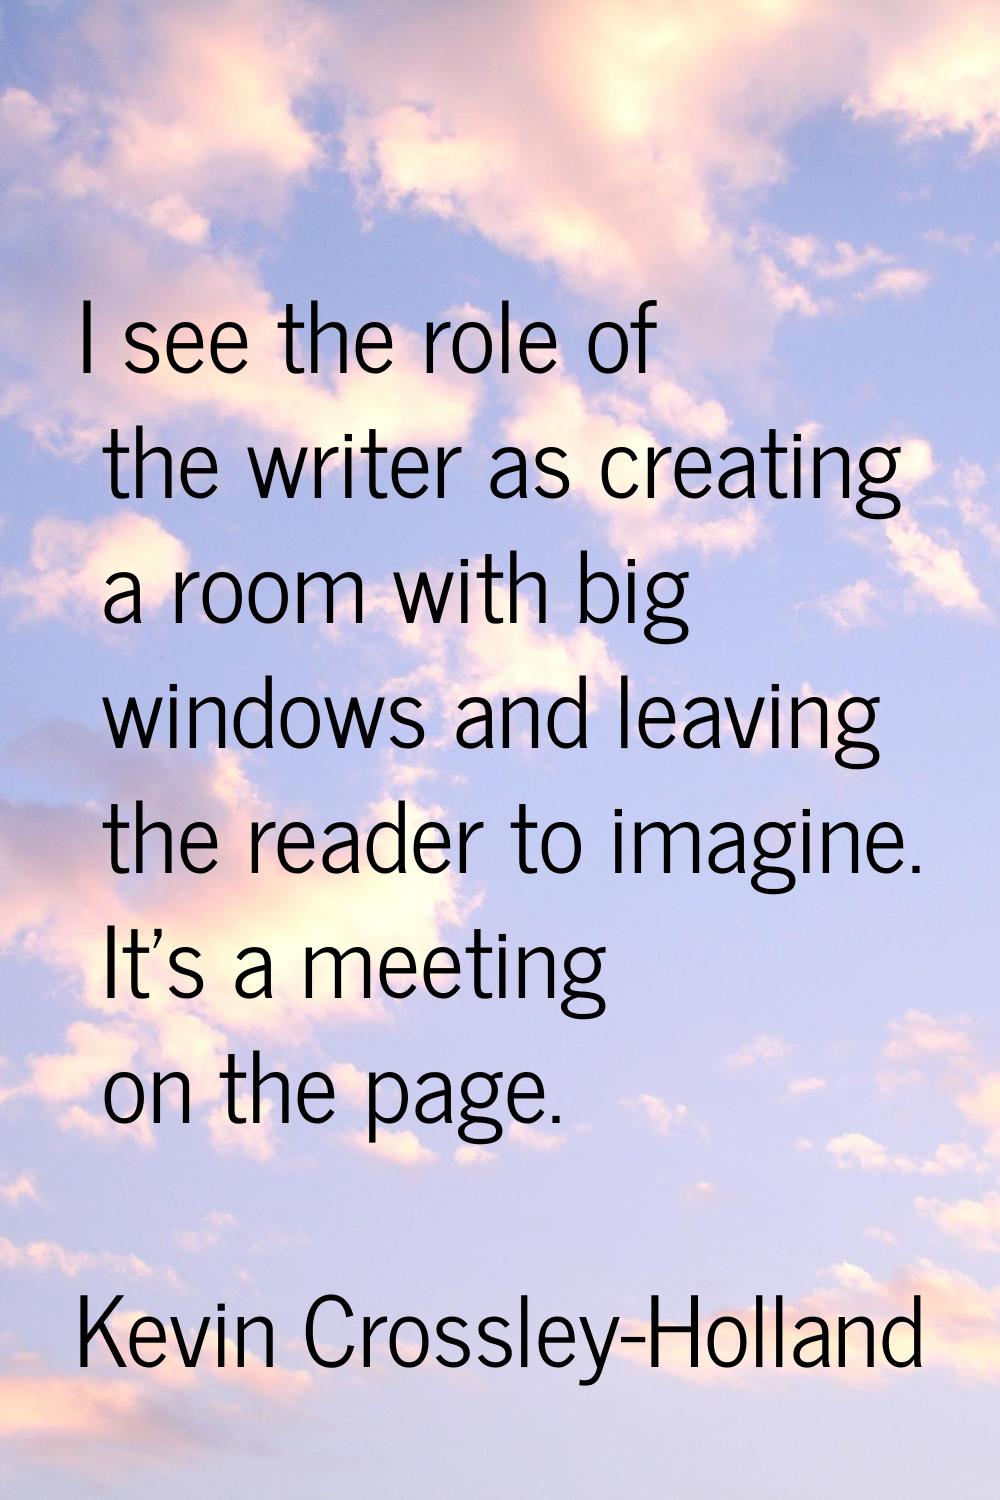 I see the role of the writer as creating a room with big windows and leaving the reader to imagine.